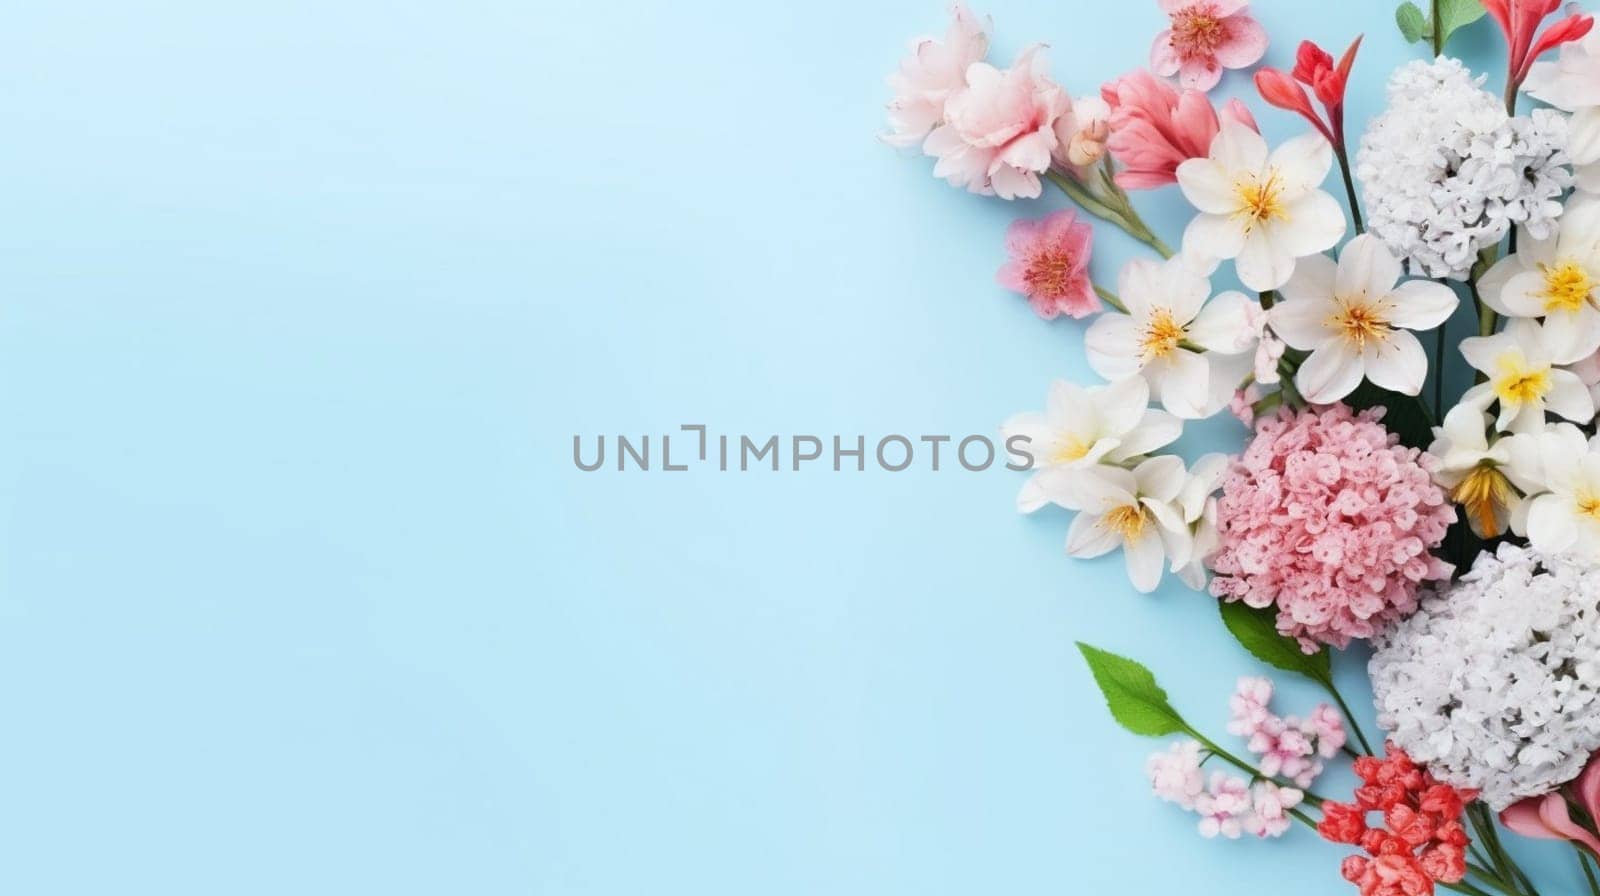 A creative arts display of pink and white flowers arranged on a blue background by kizuneko